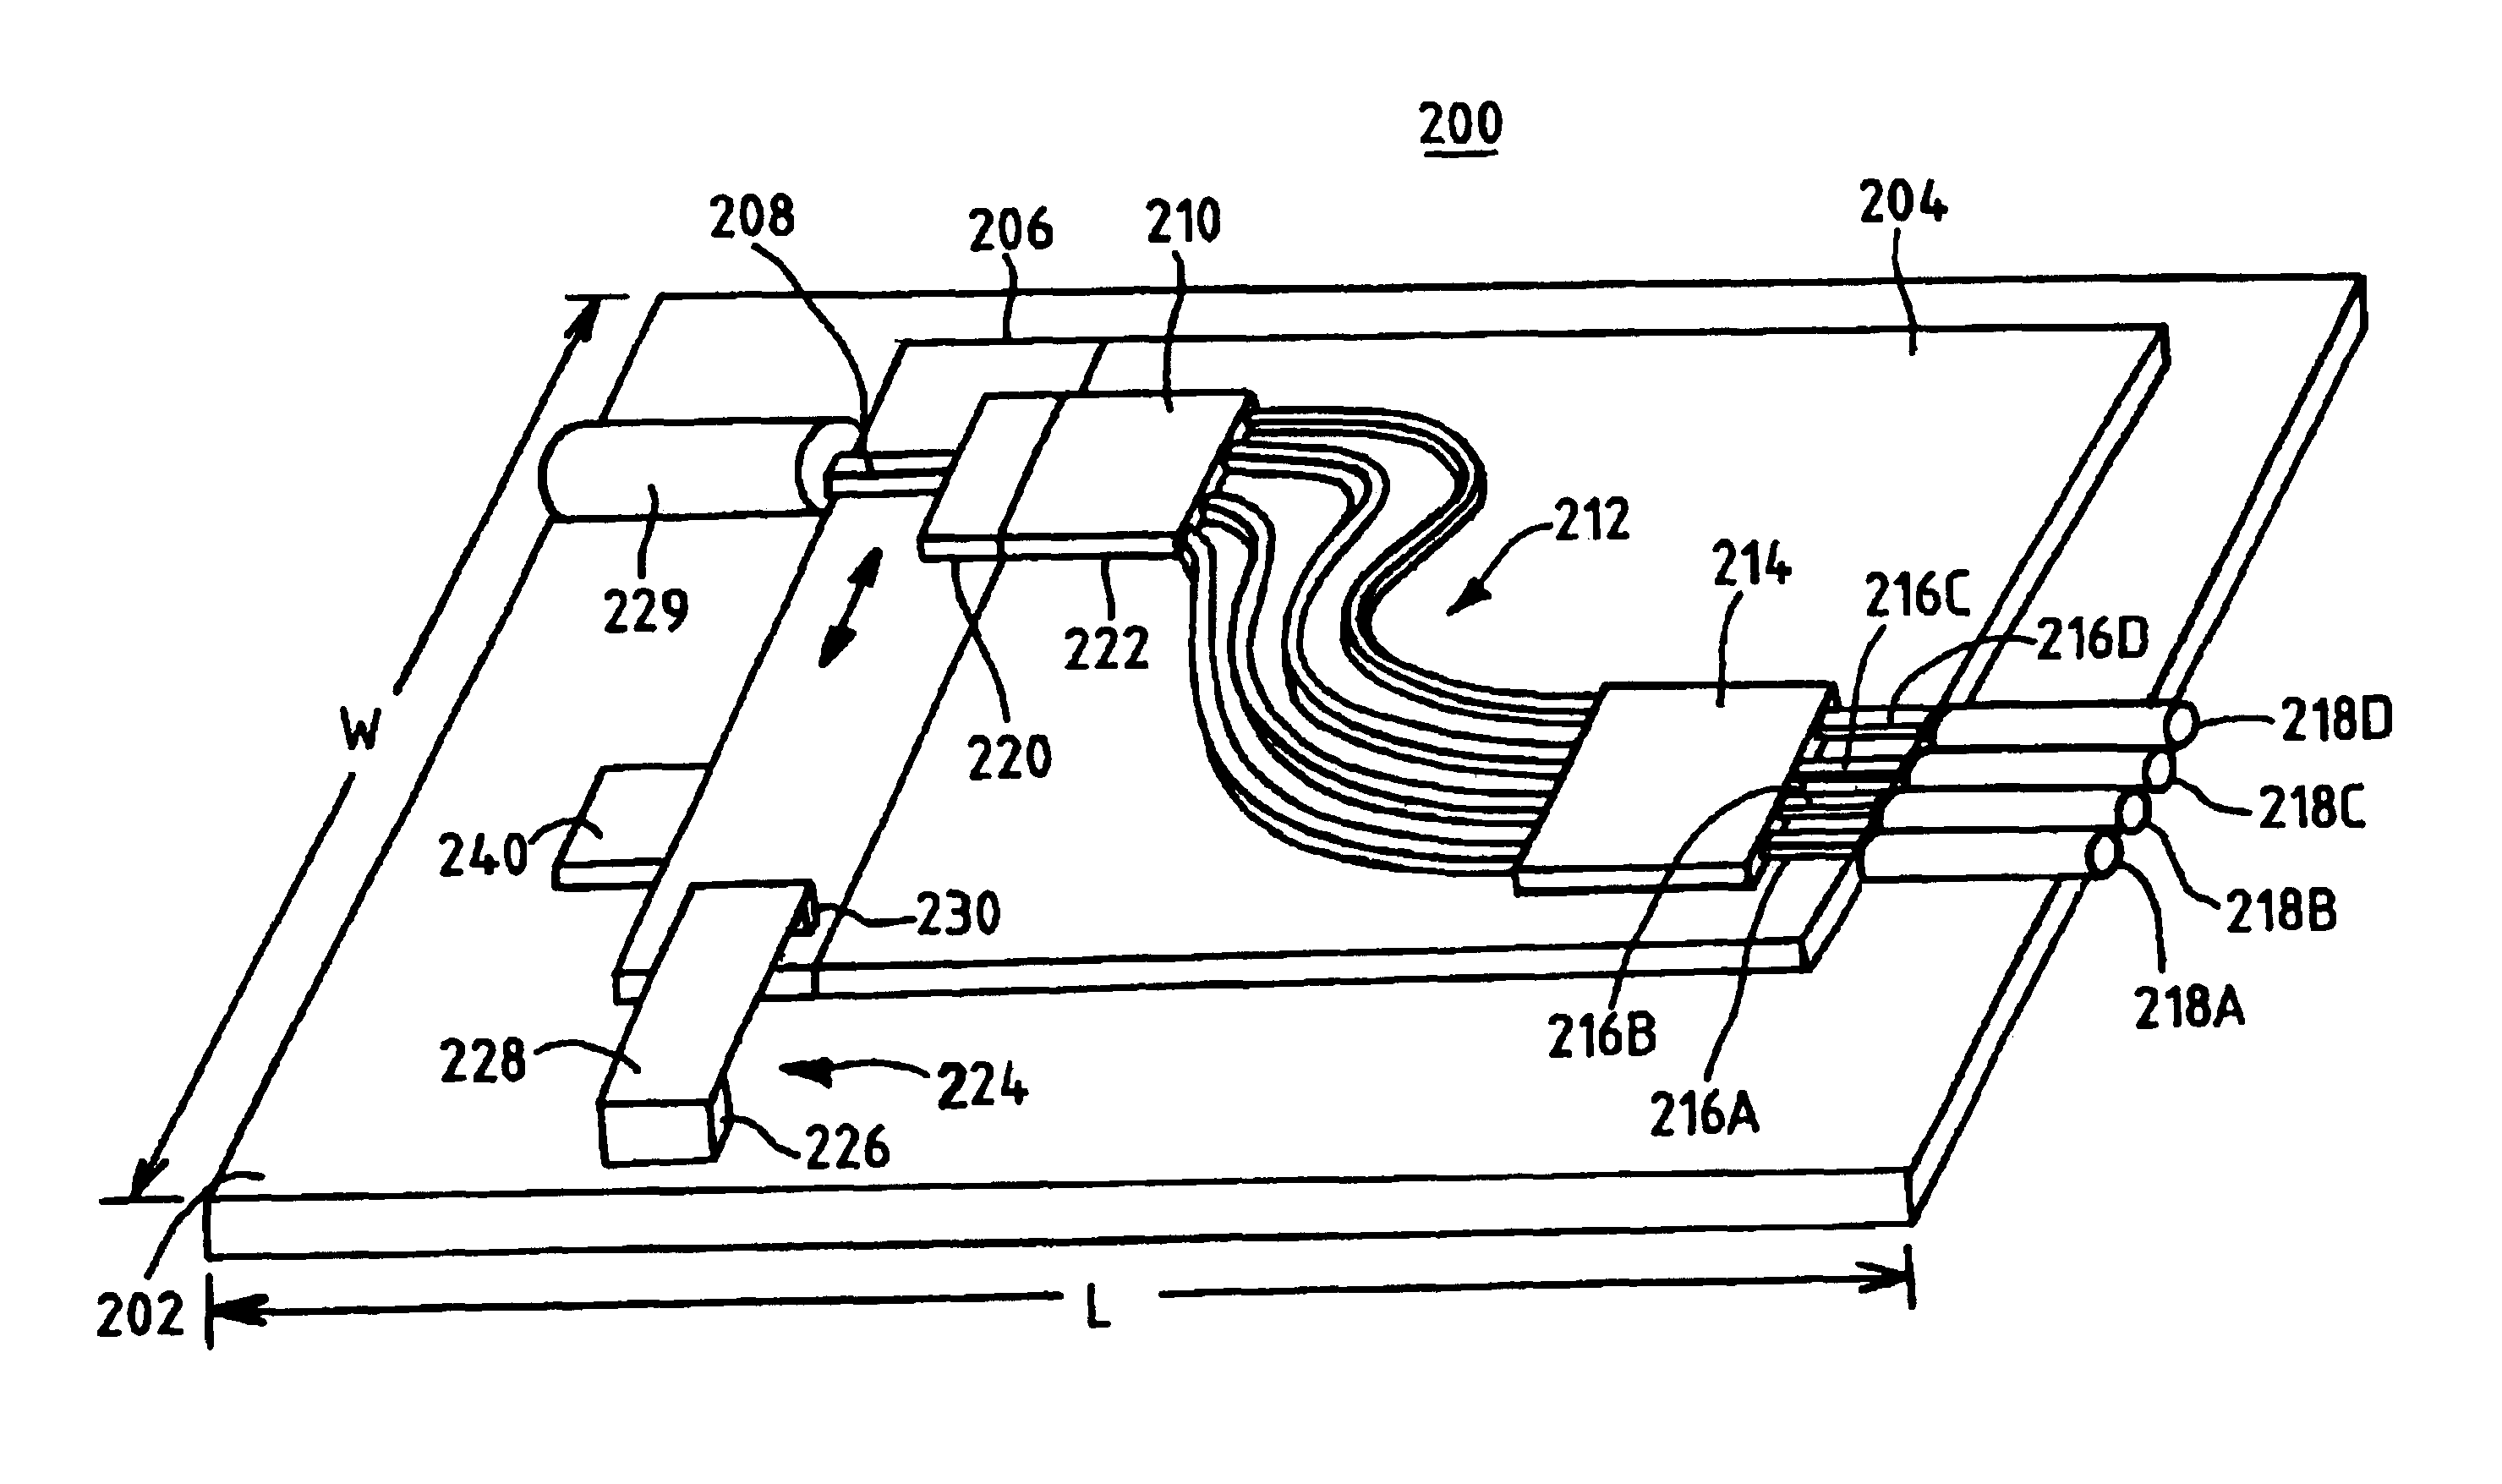 Apparatus for thermal compensation of an arrayed waveguide grating